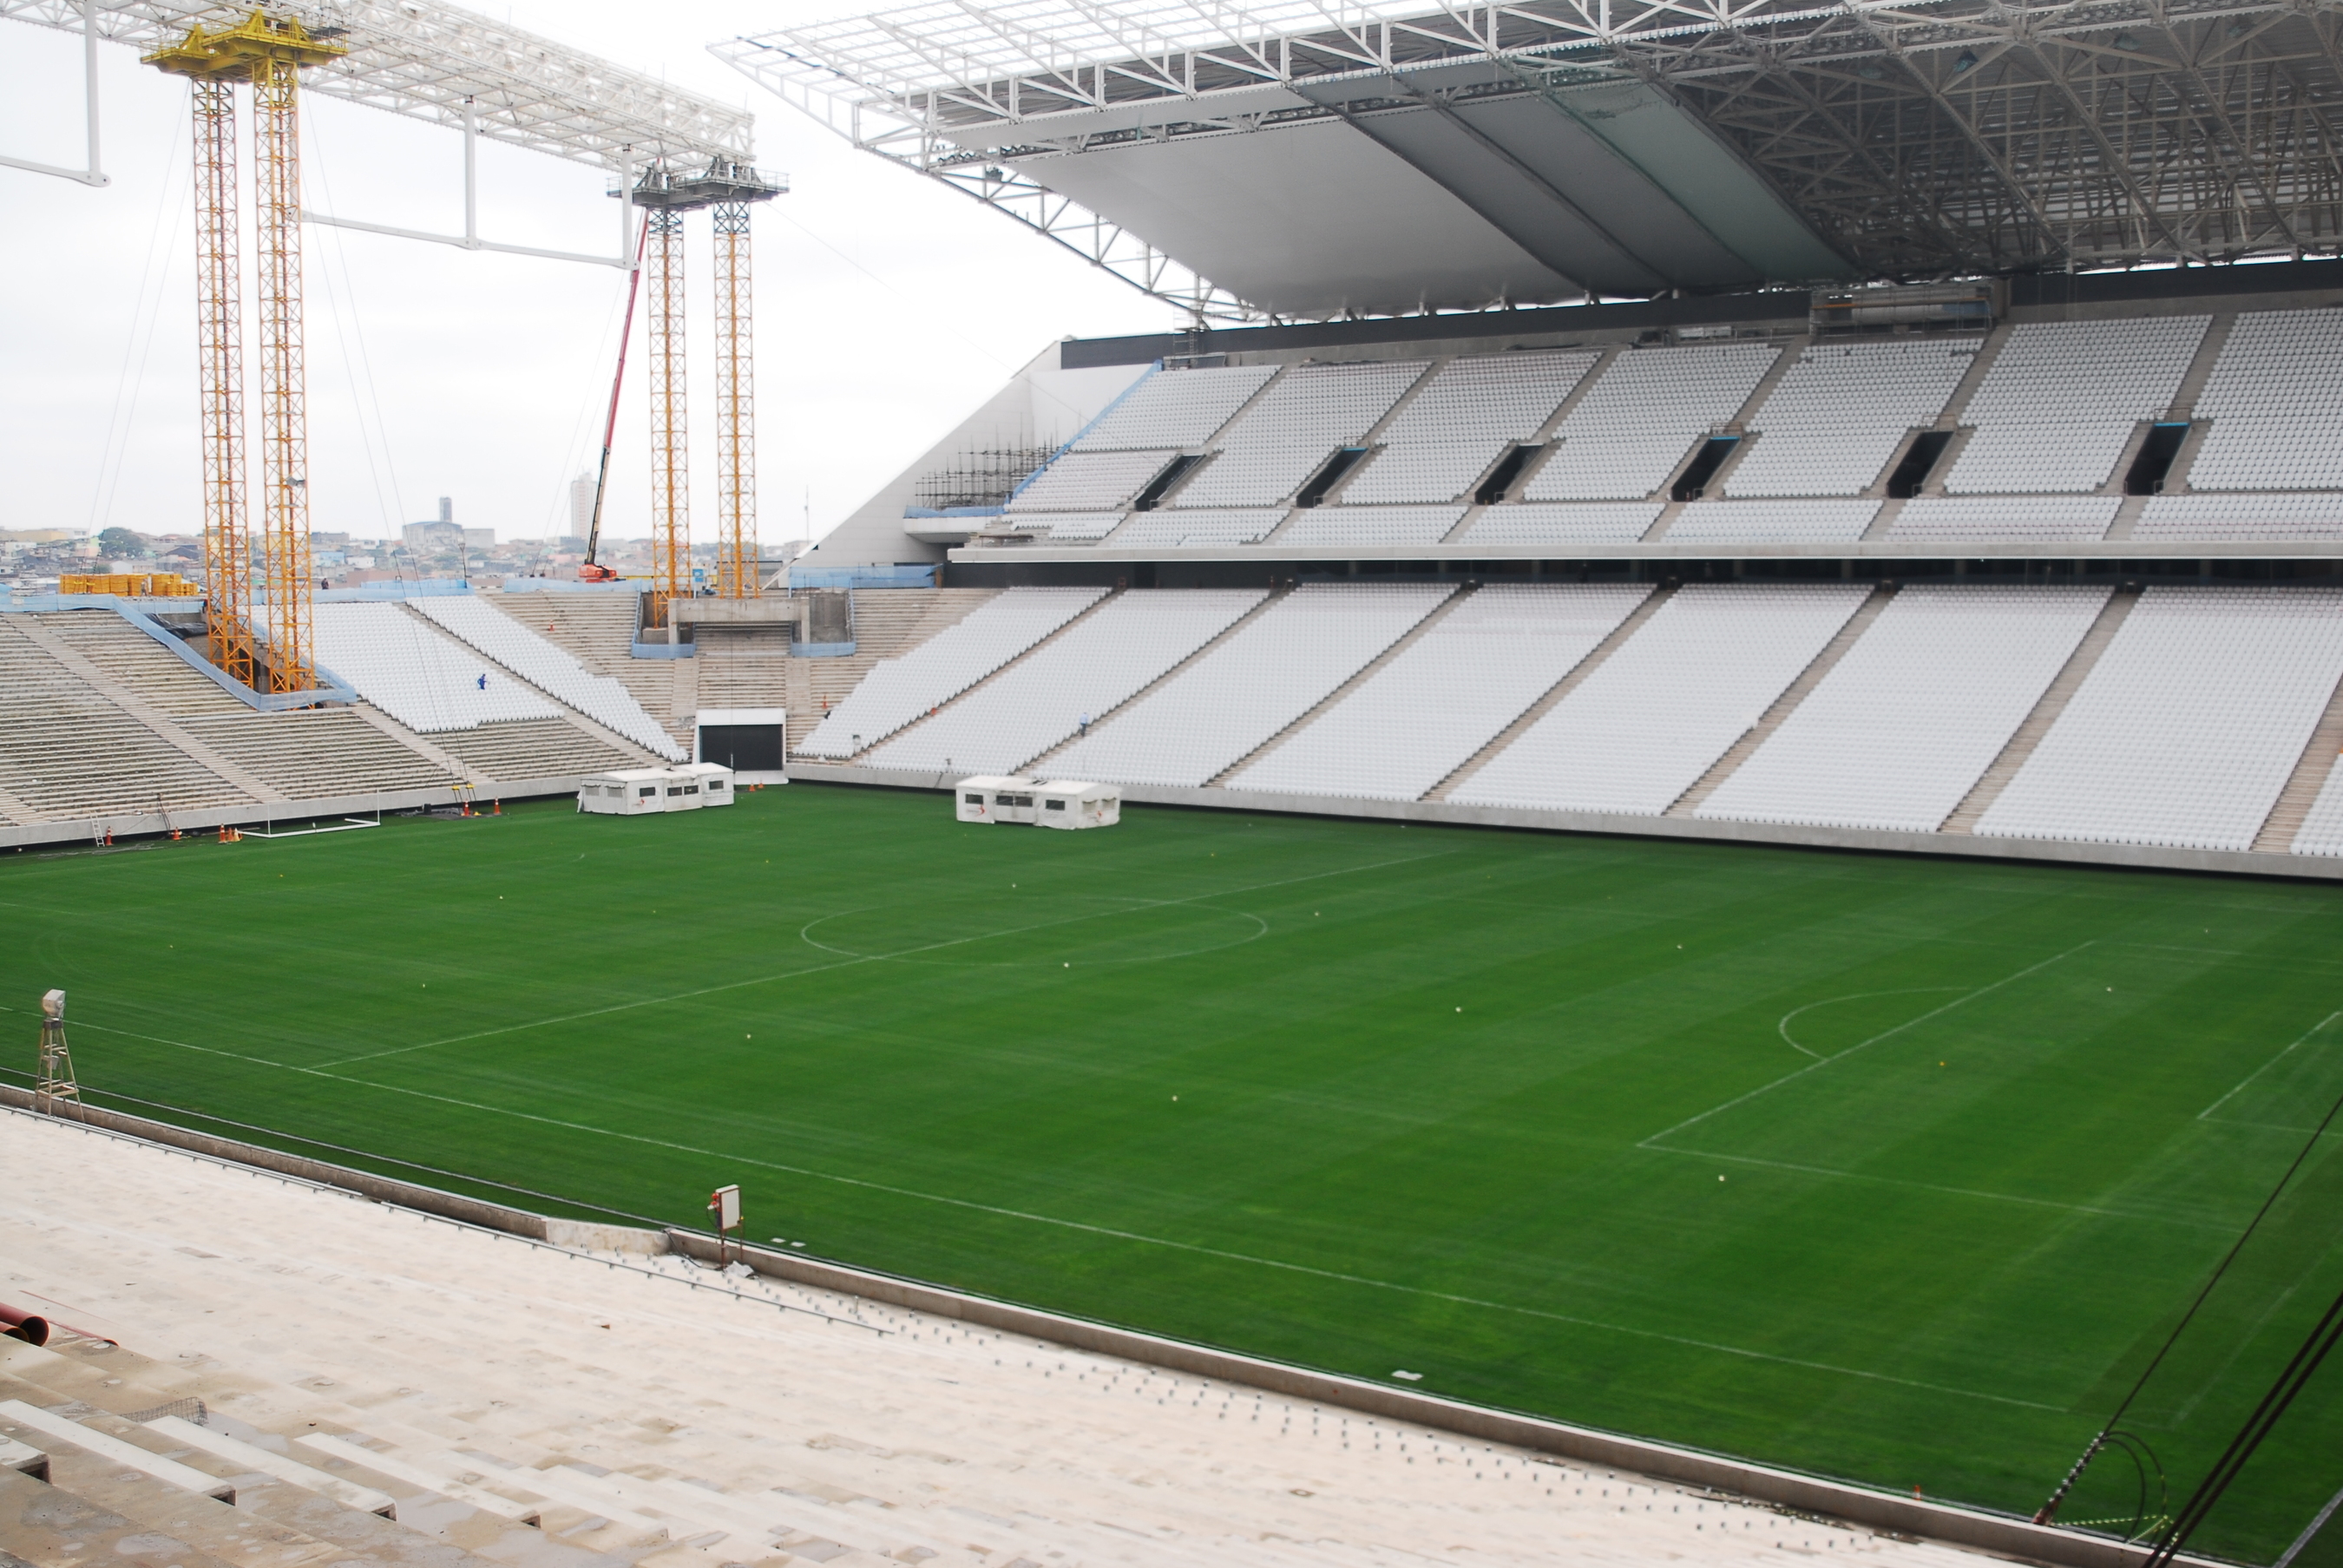 The grass surface of the stadium of Corinthians, Sao Paulo, 2014 FIFA World Cup stadium is currently being installed.Desso GrassMaster is a hybrid grass system: a 100 % natural grass field reinforced by 20 million artificial fibres. The machines ( protected by tents) inject the artificial fibres every 2x2cm about 18 cm deep into the soil. dessosports.com (PRNewsFoto/Desso)